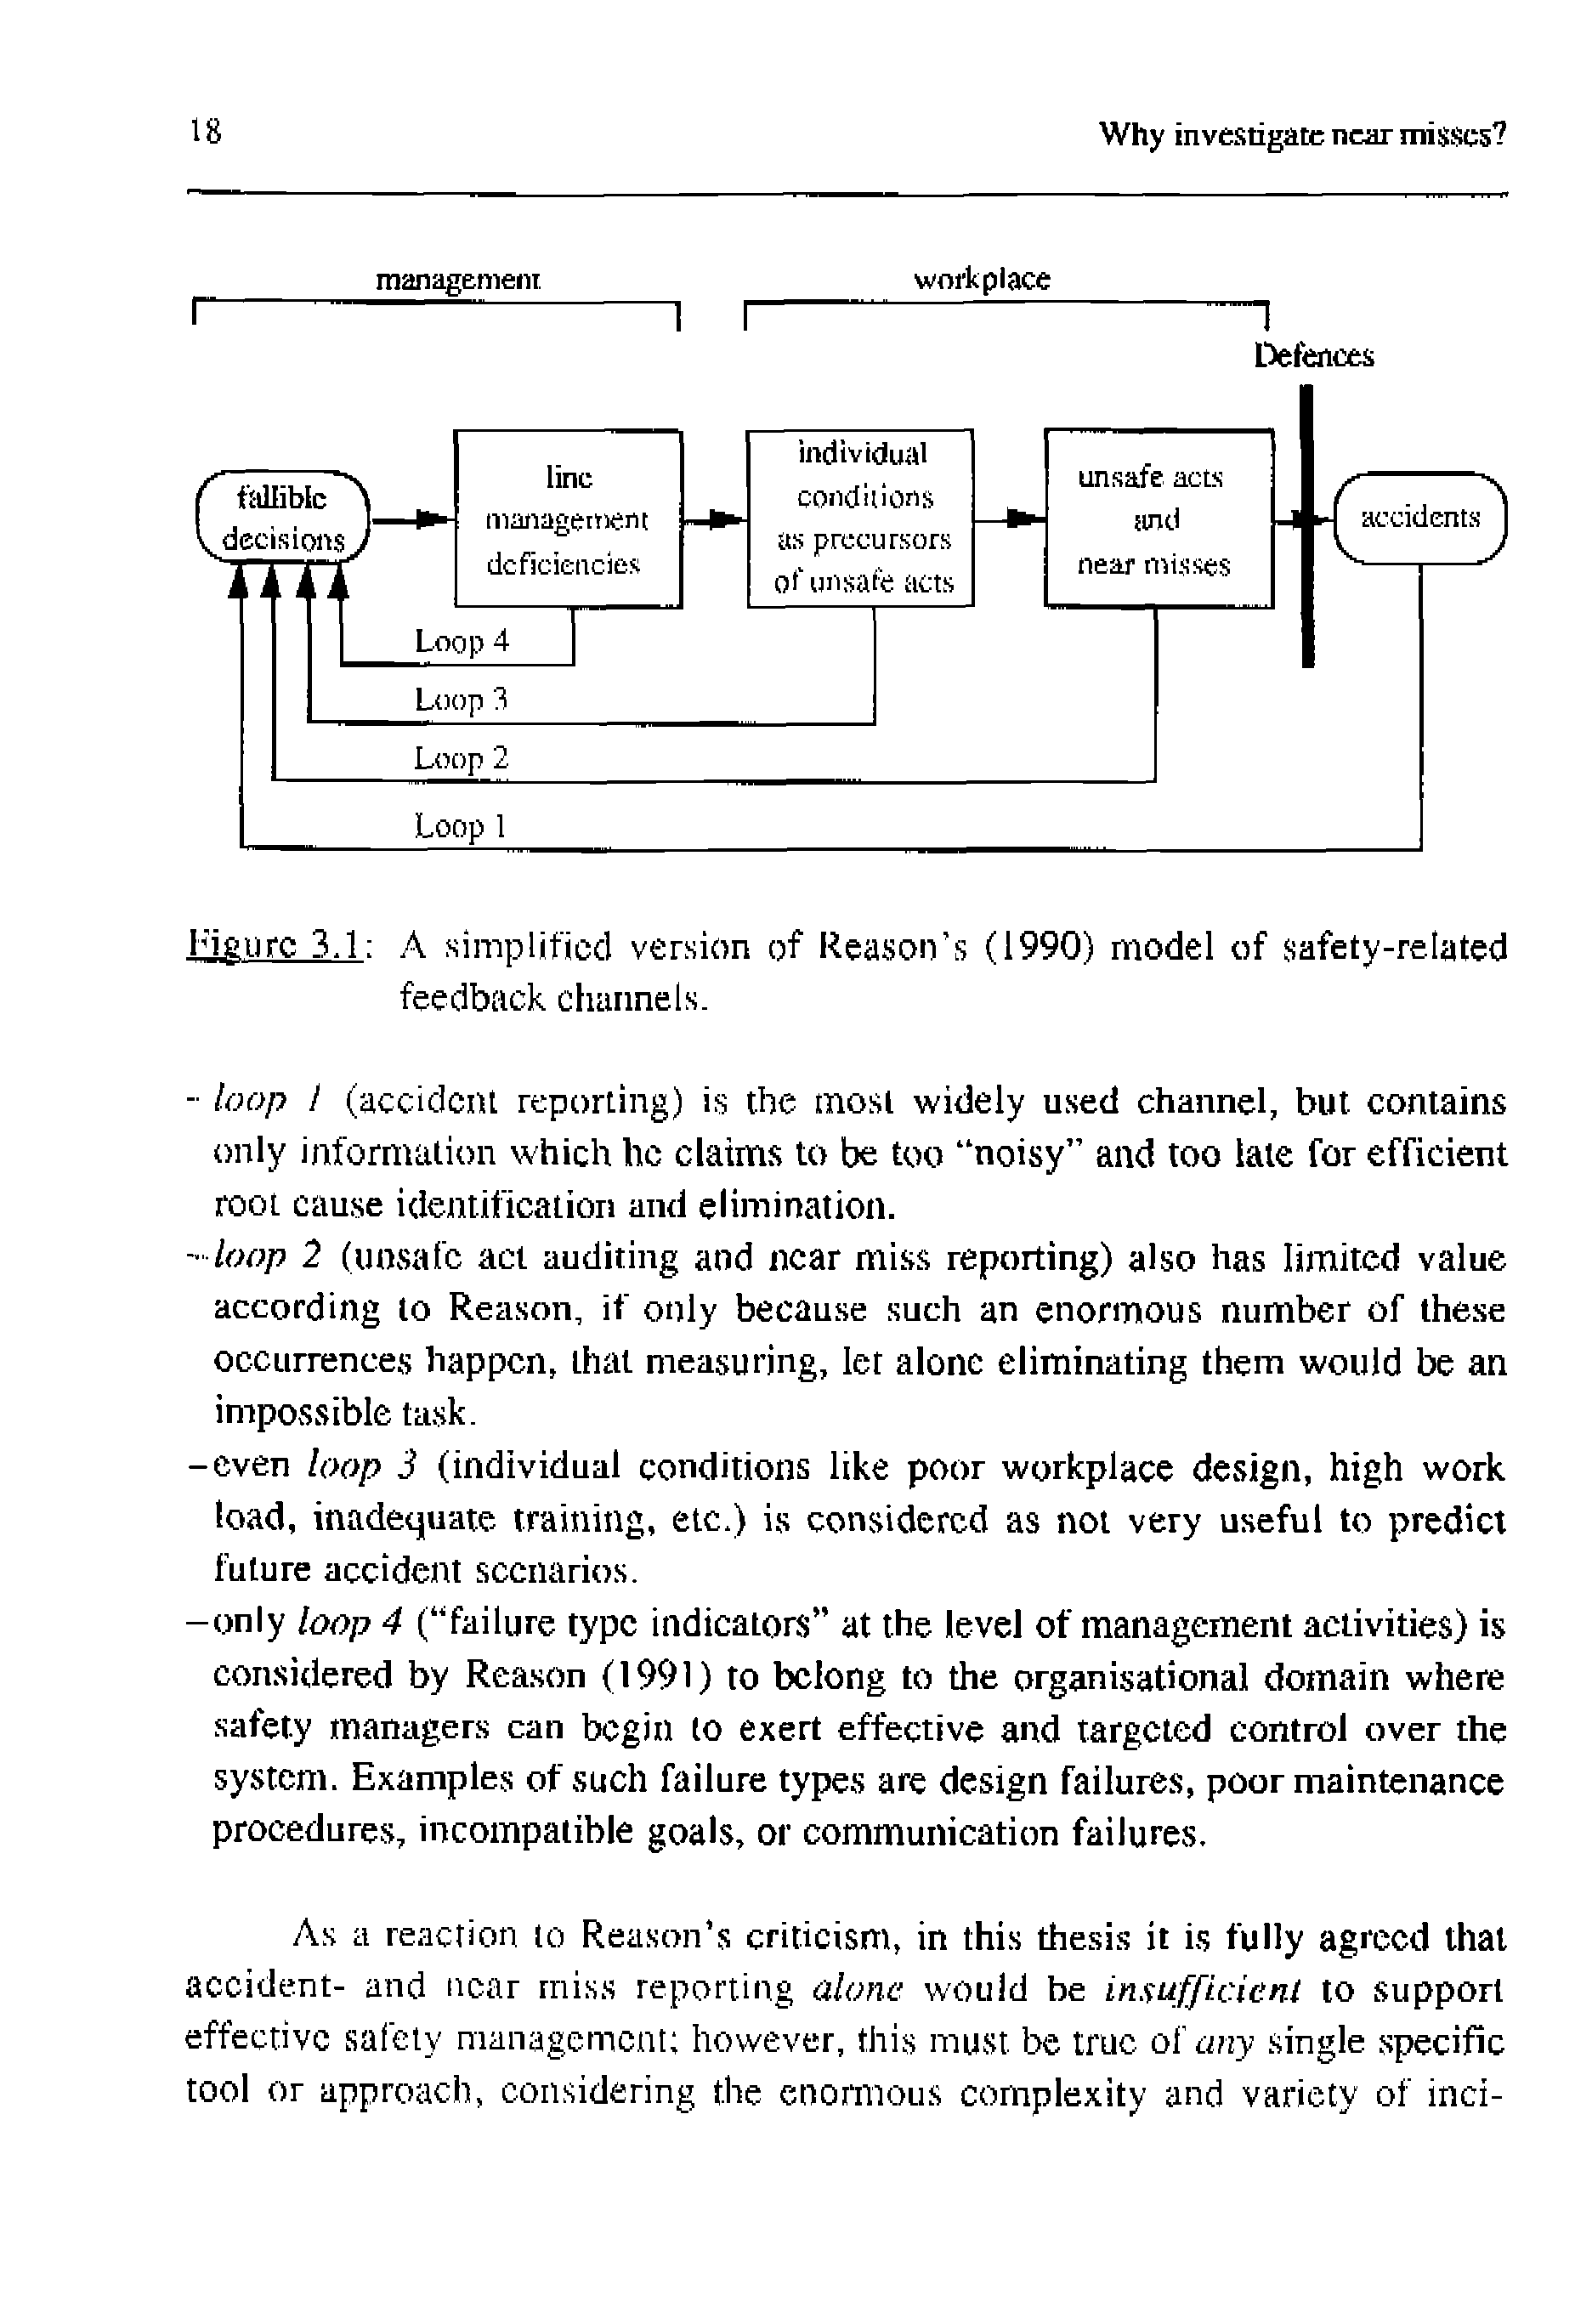 Figure 3.1 A simplified version of Reason s (1990) model of safety-related feedback channels.